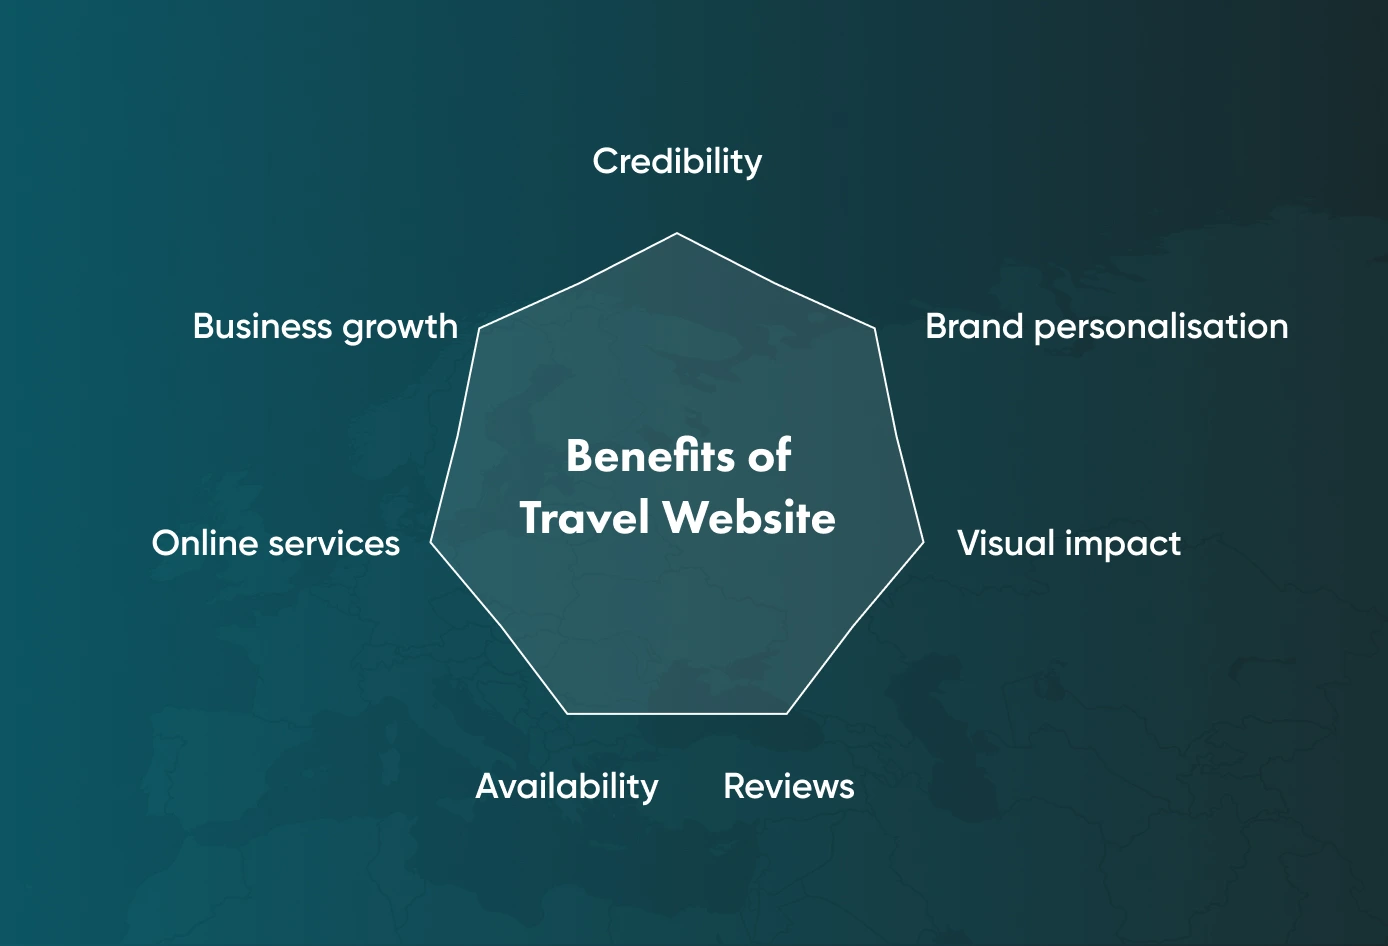 Benefits of a travel website include areas such as visual impact and business growth.